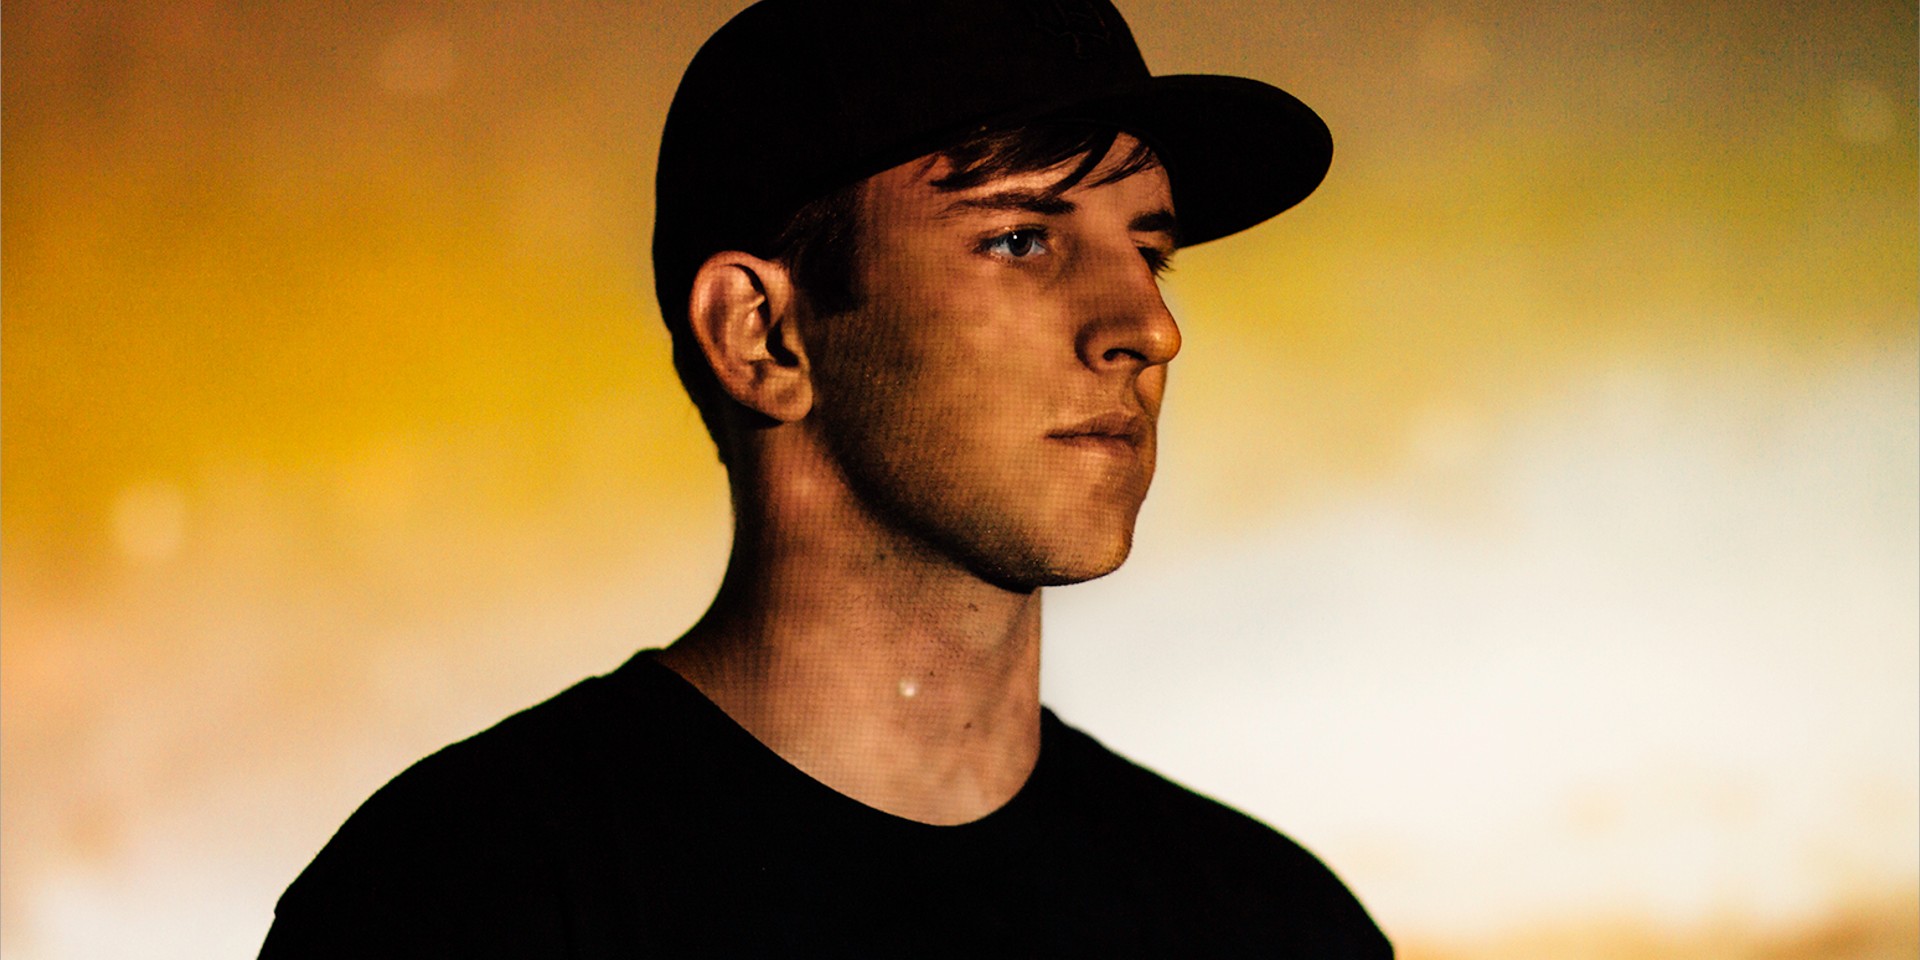 "This is therapeutic for me": ILLENIUM on touring, the effect his music has on people, and more